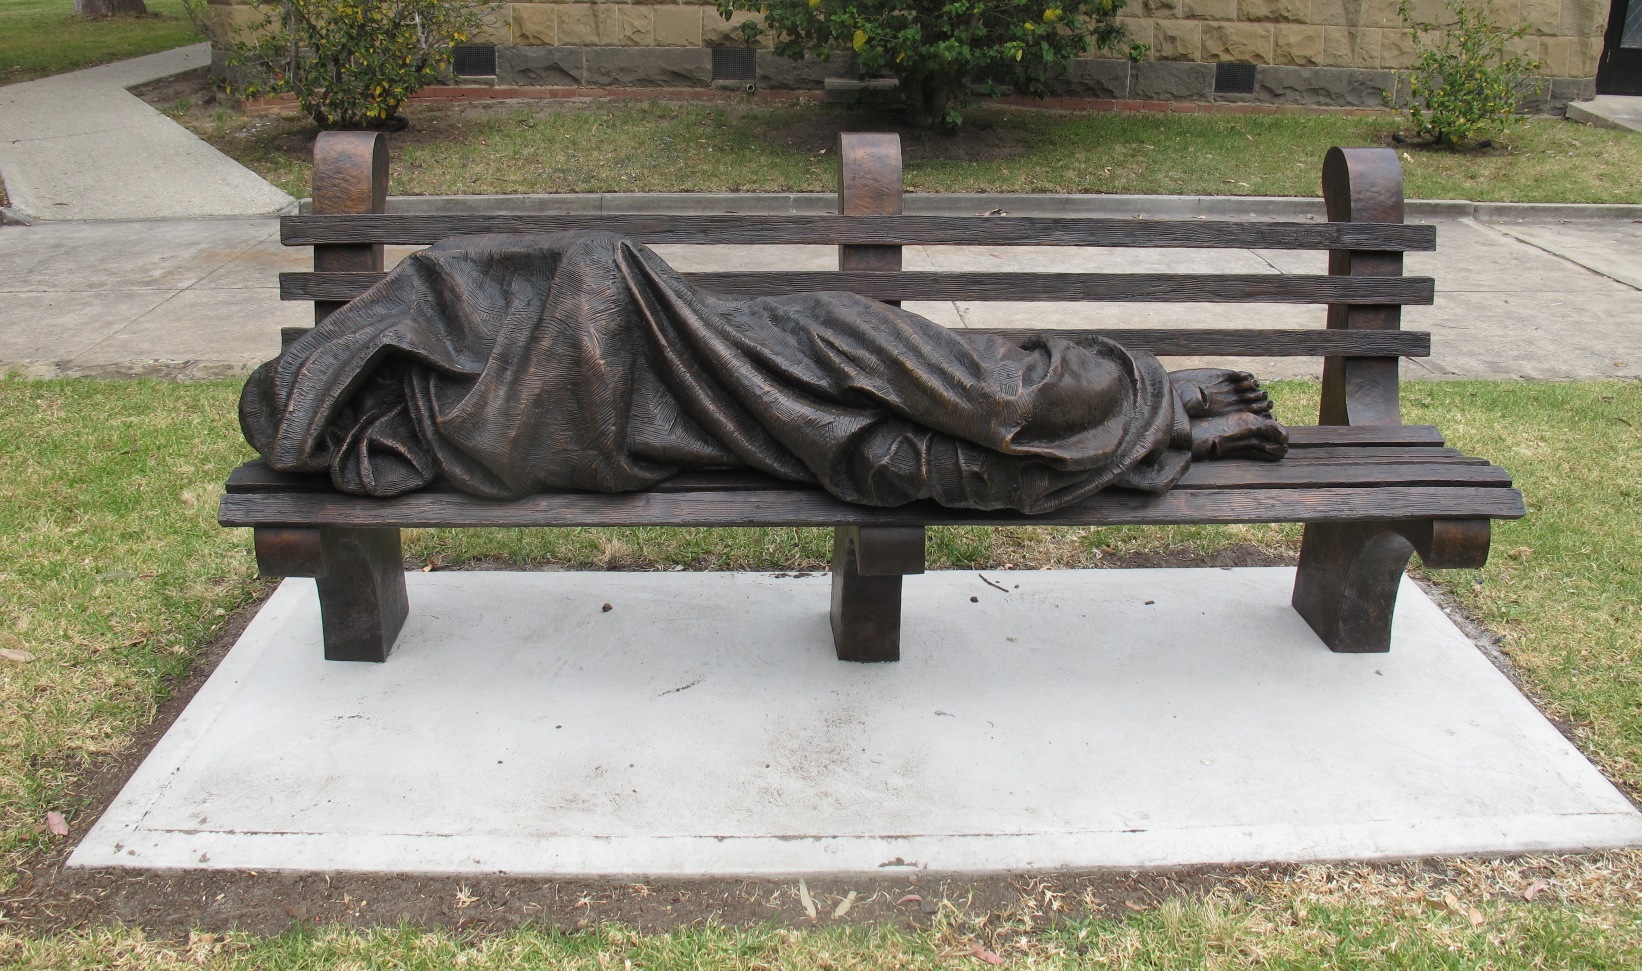 A dark bronze, realistic-looking statue of a person wrapped in a too-small blanket lying on a public bench.